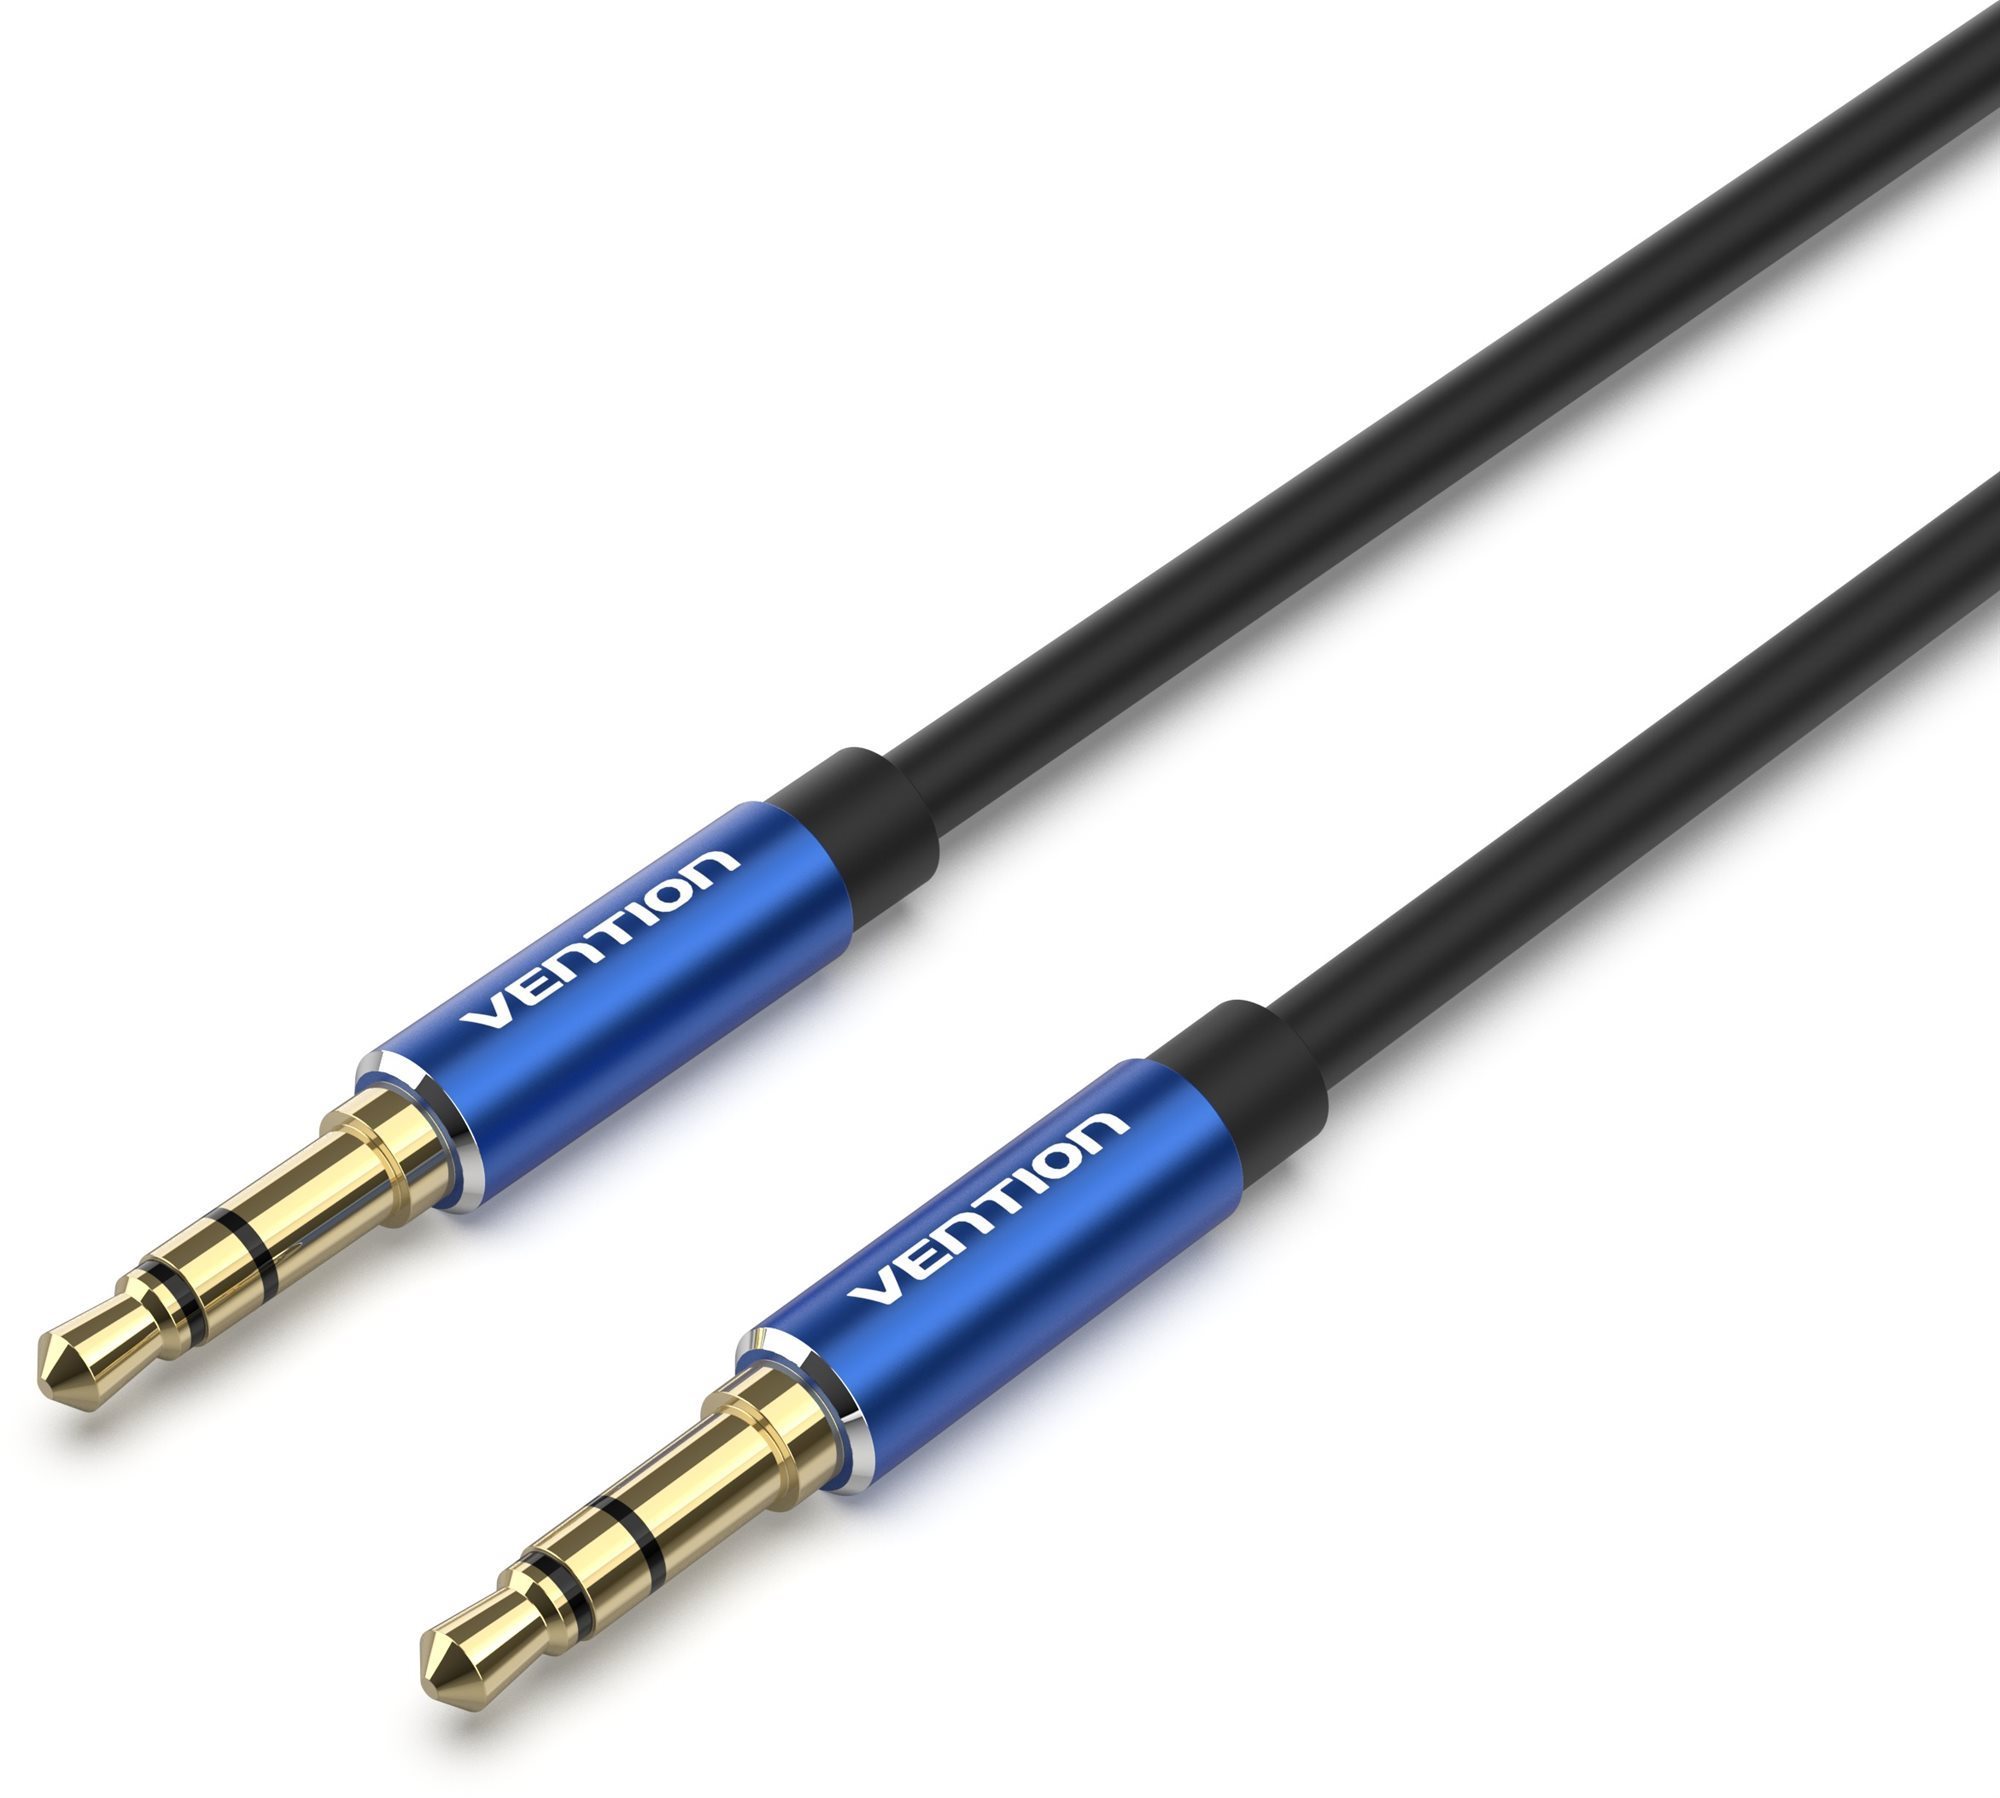 Vention 3,5 mm Male to Male Audio Cable 5 m Blue Aluminum Alloy Type